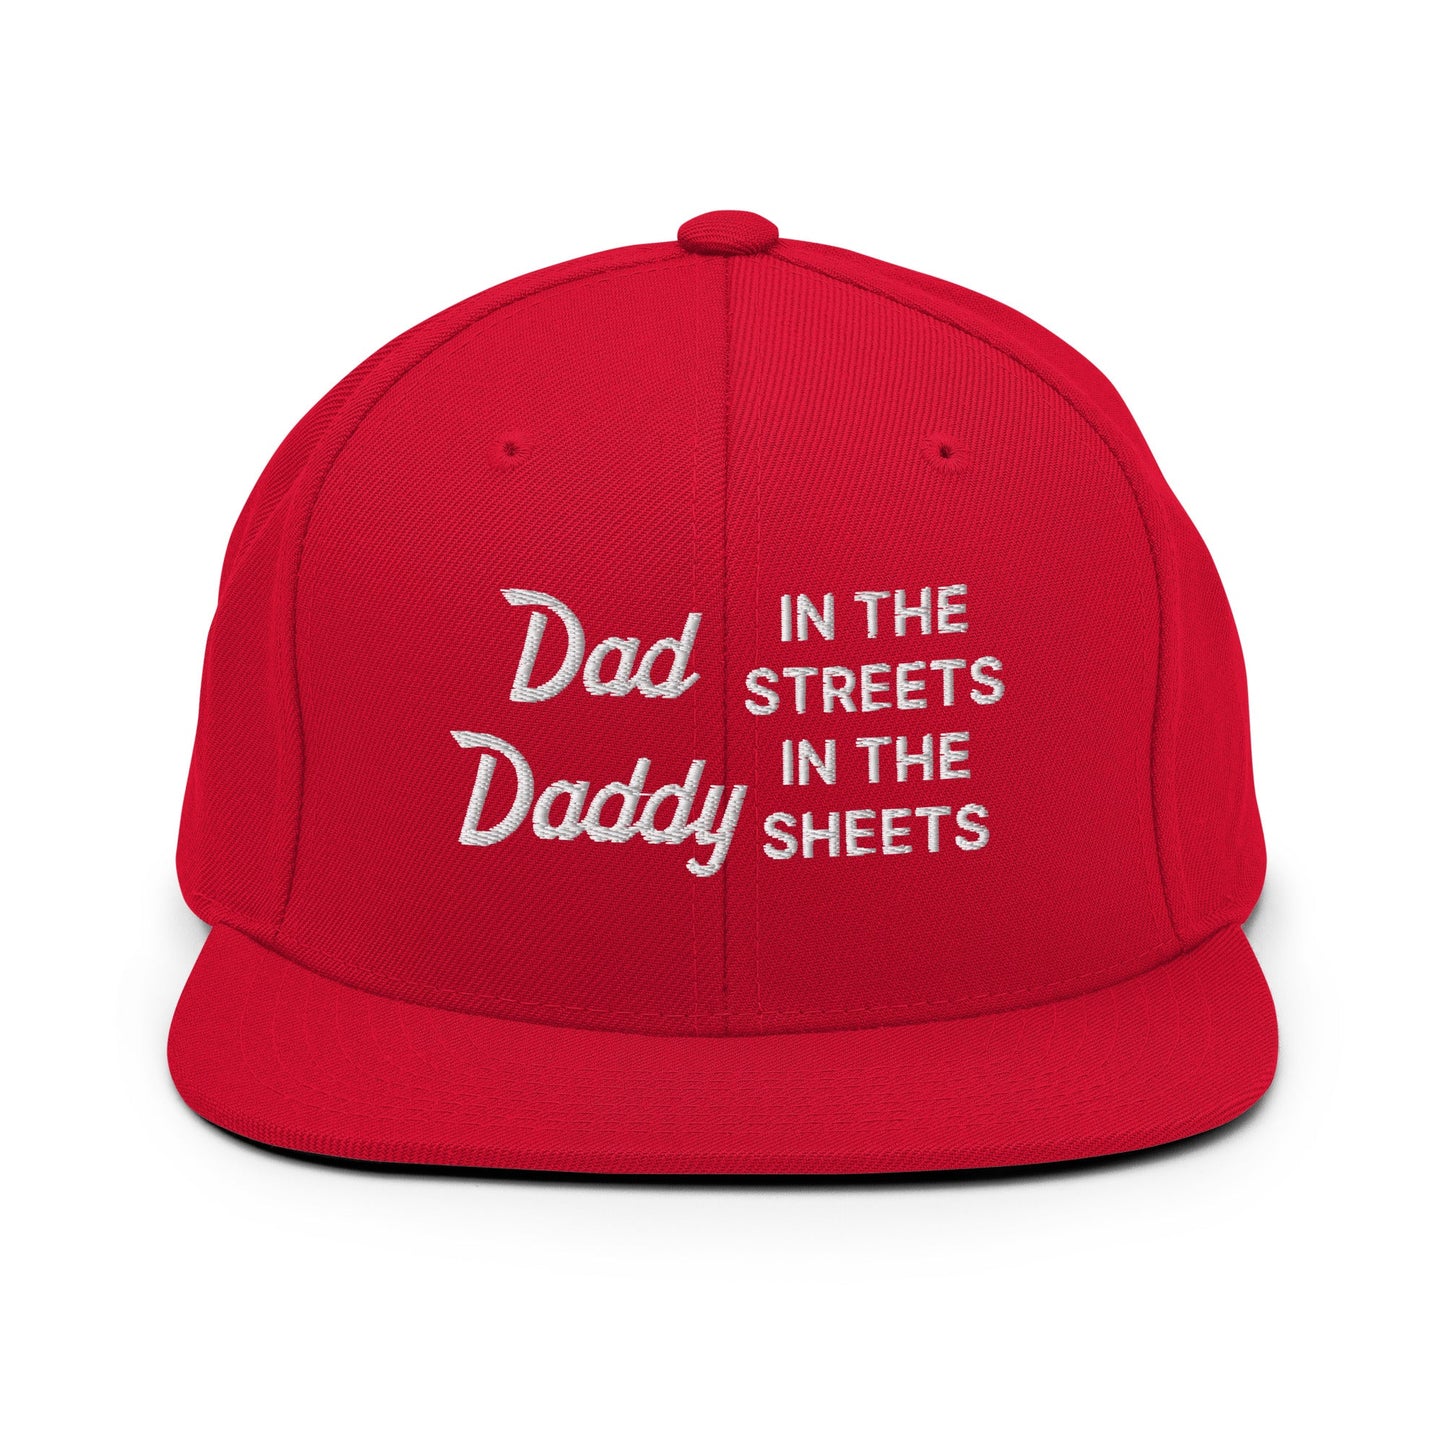 Dad In The Streets Daddy In The Sheets Snapback Hat Red